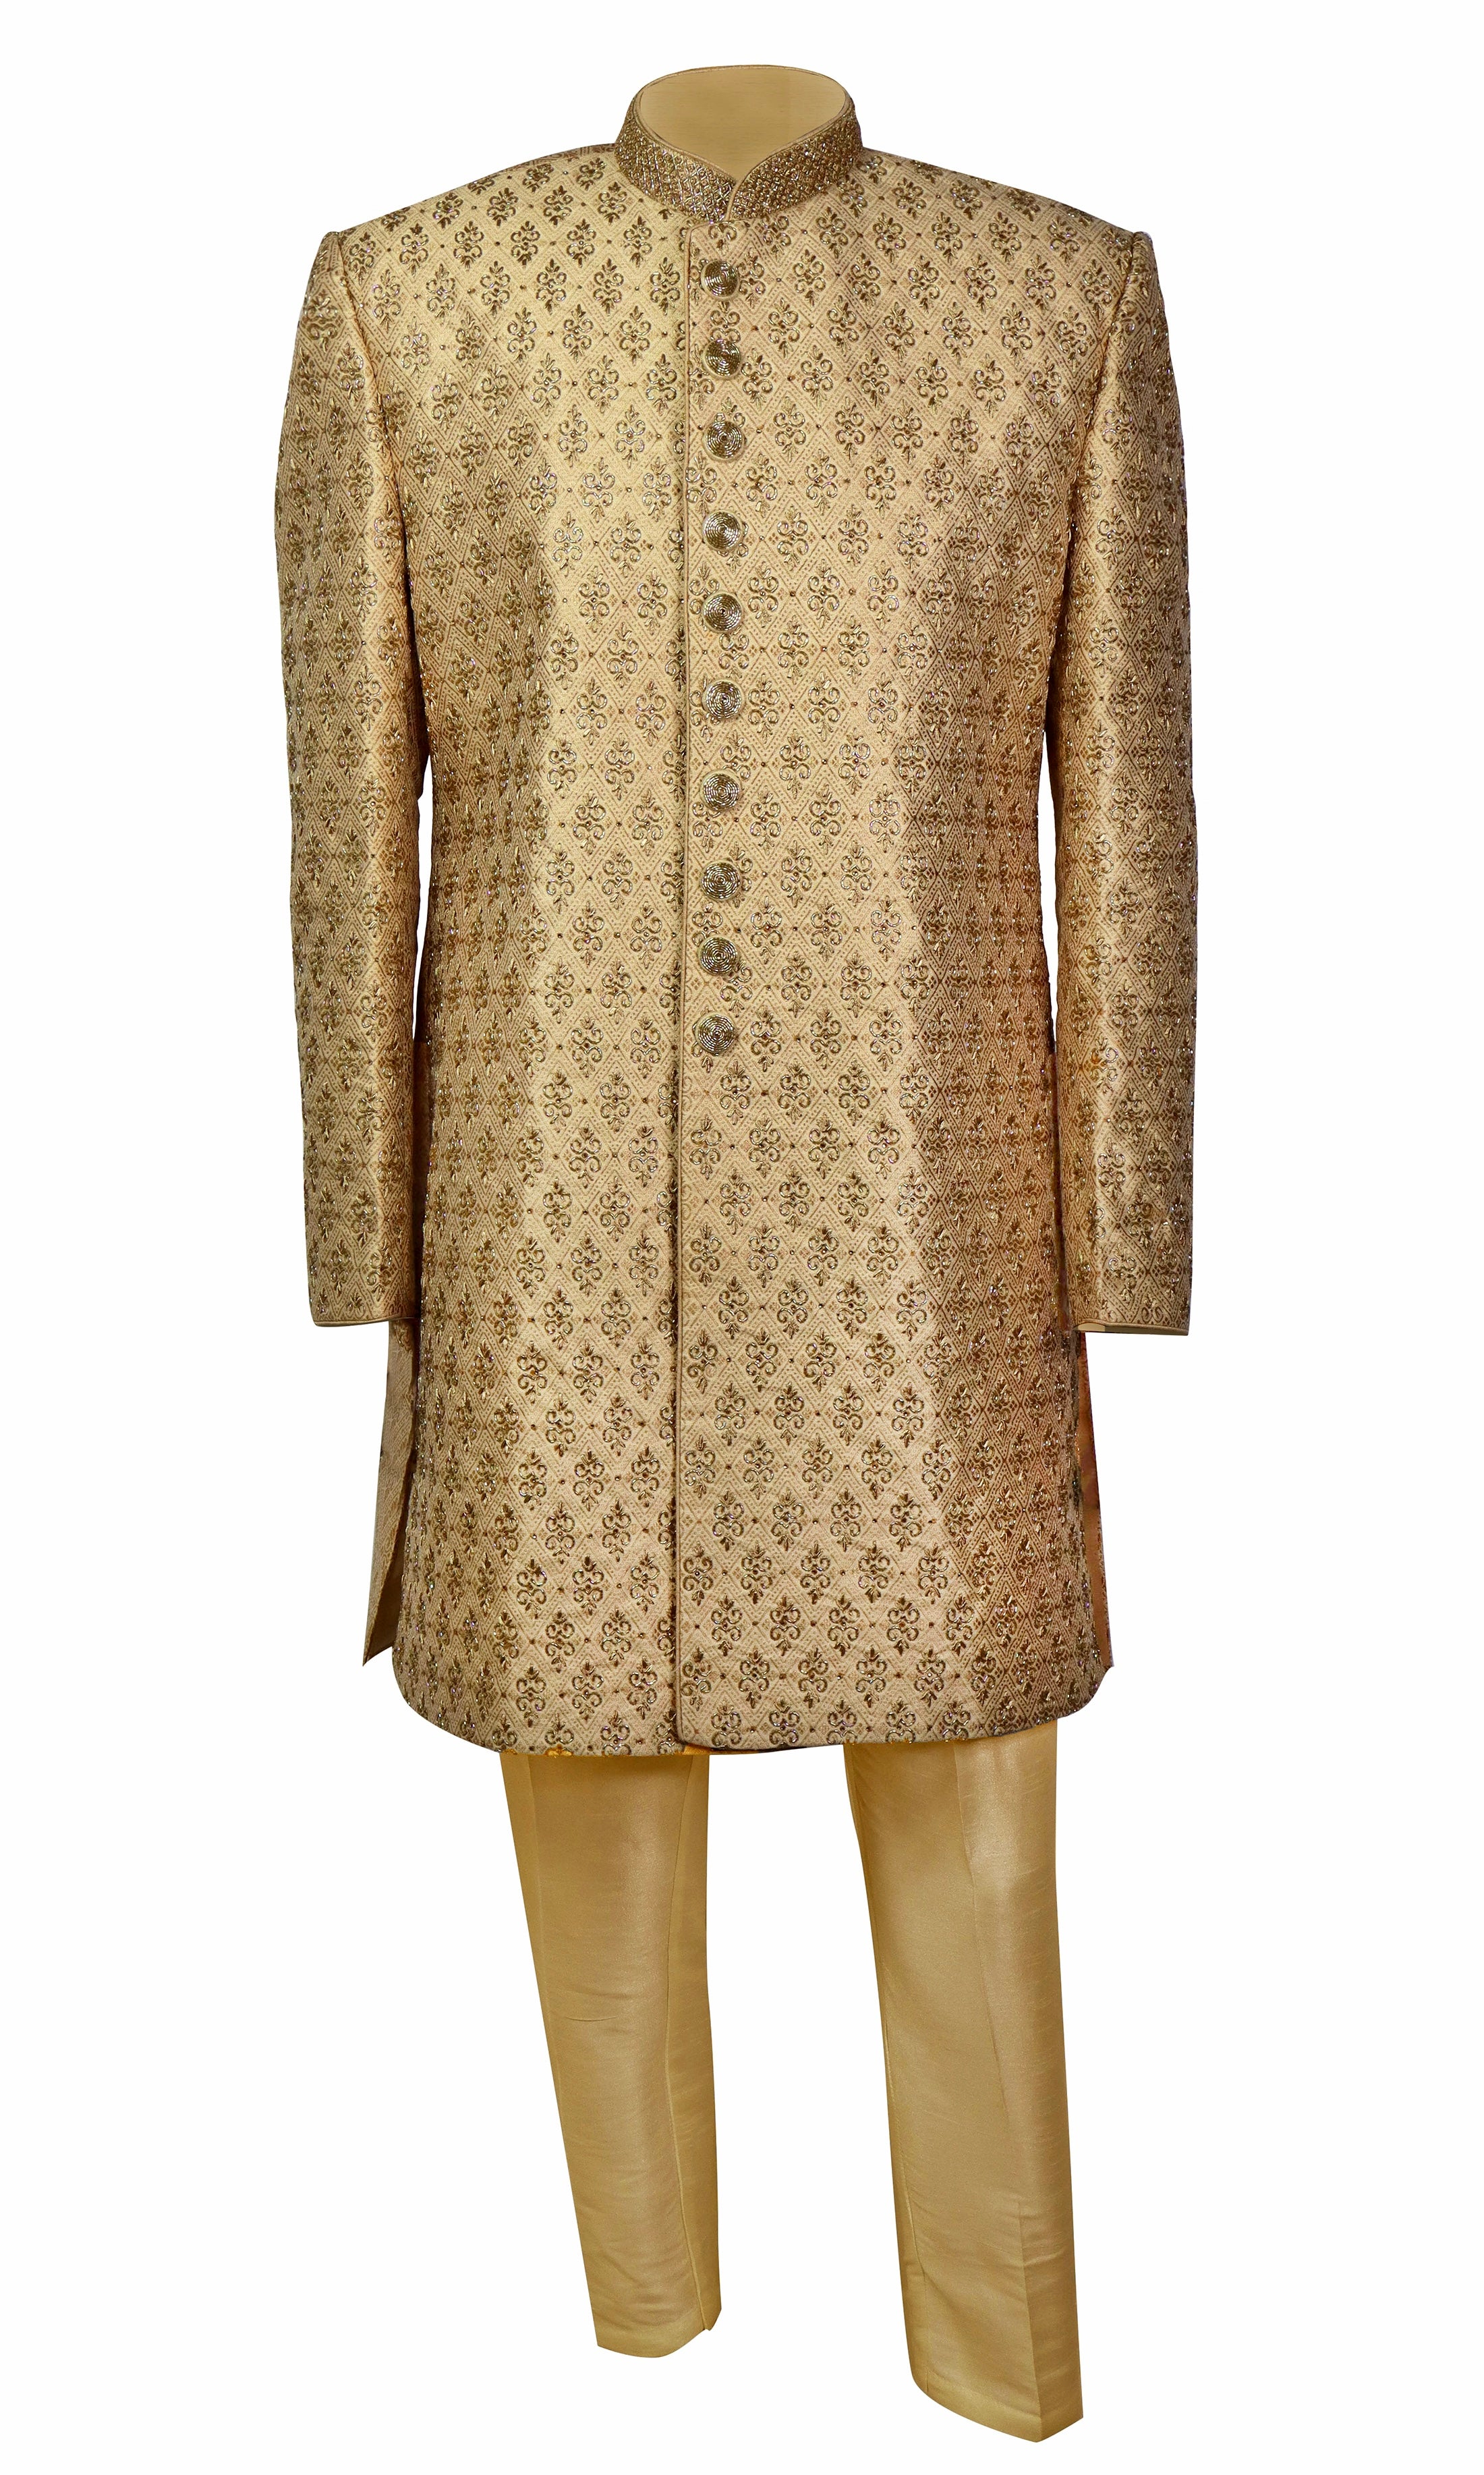 Gold silk Sherwani features an elegant patterns look is completed with the matching gold pants.